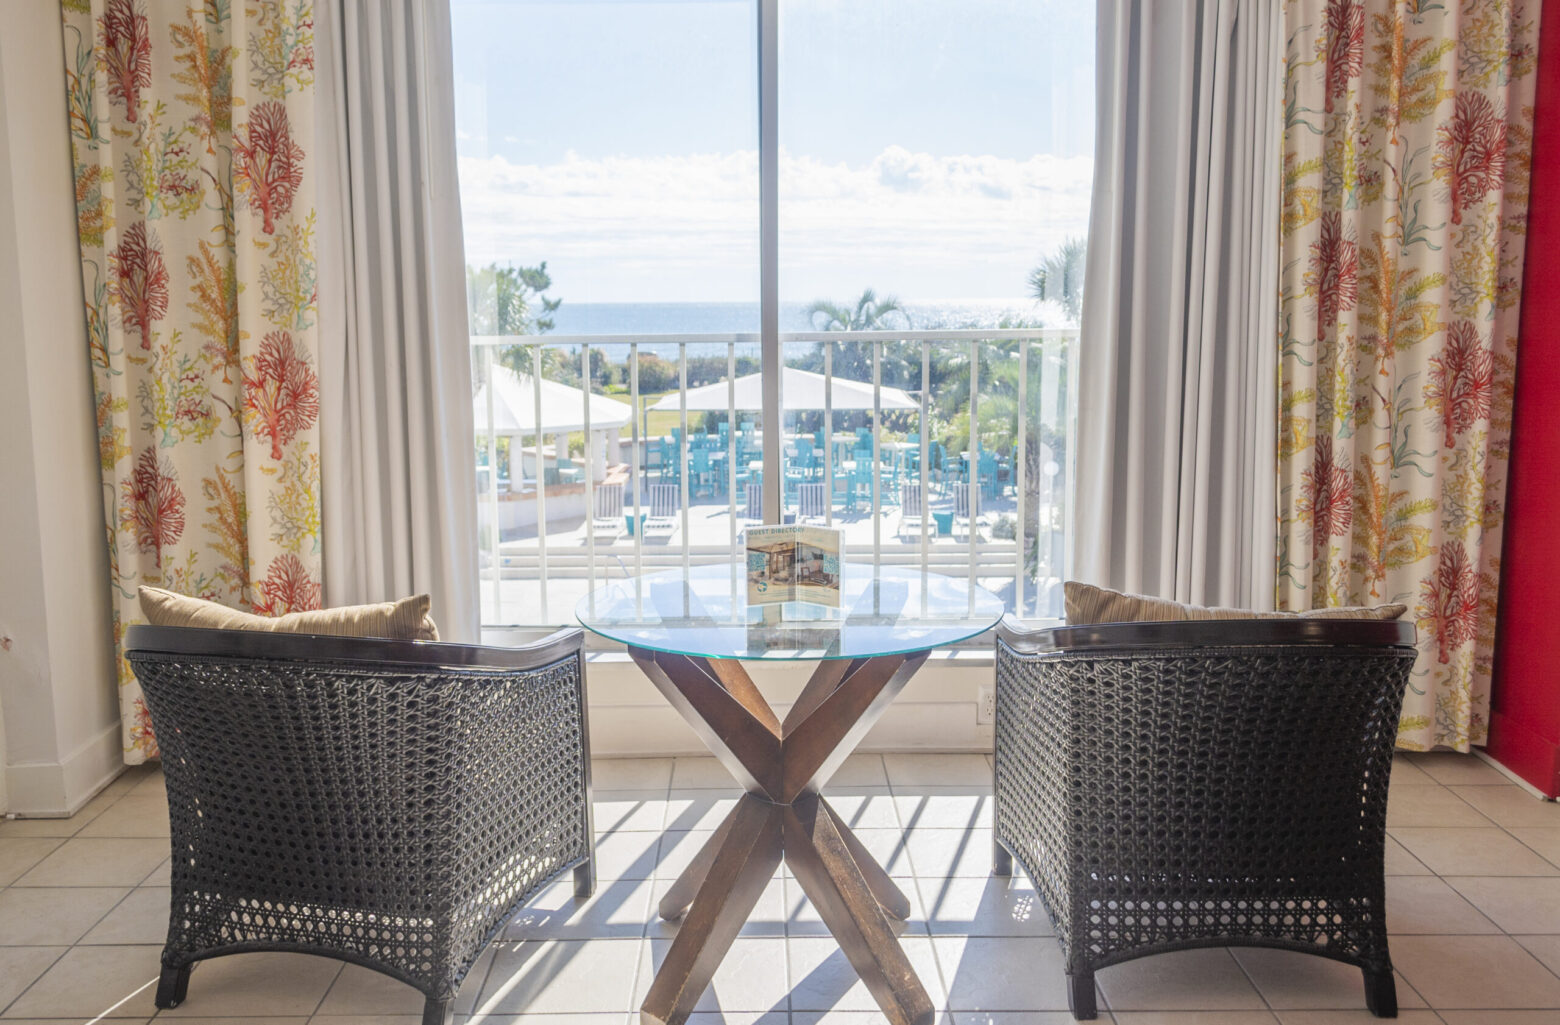 Oceanfront room wicker chairs with pool view at Blockade Runner.